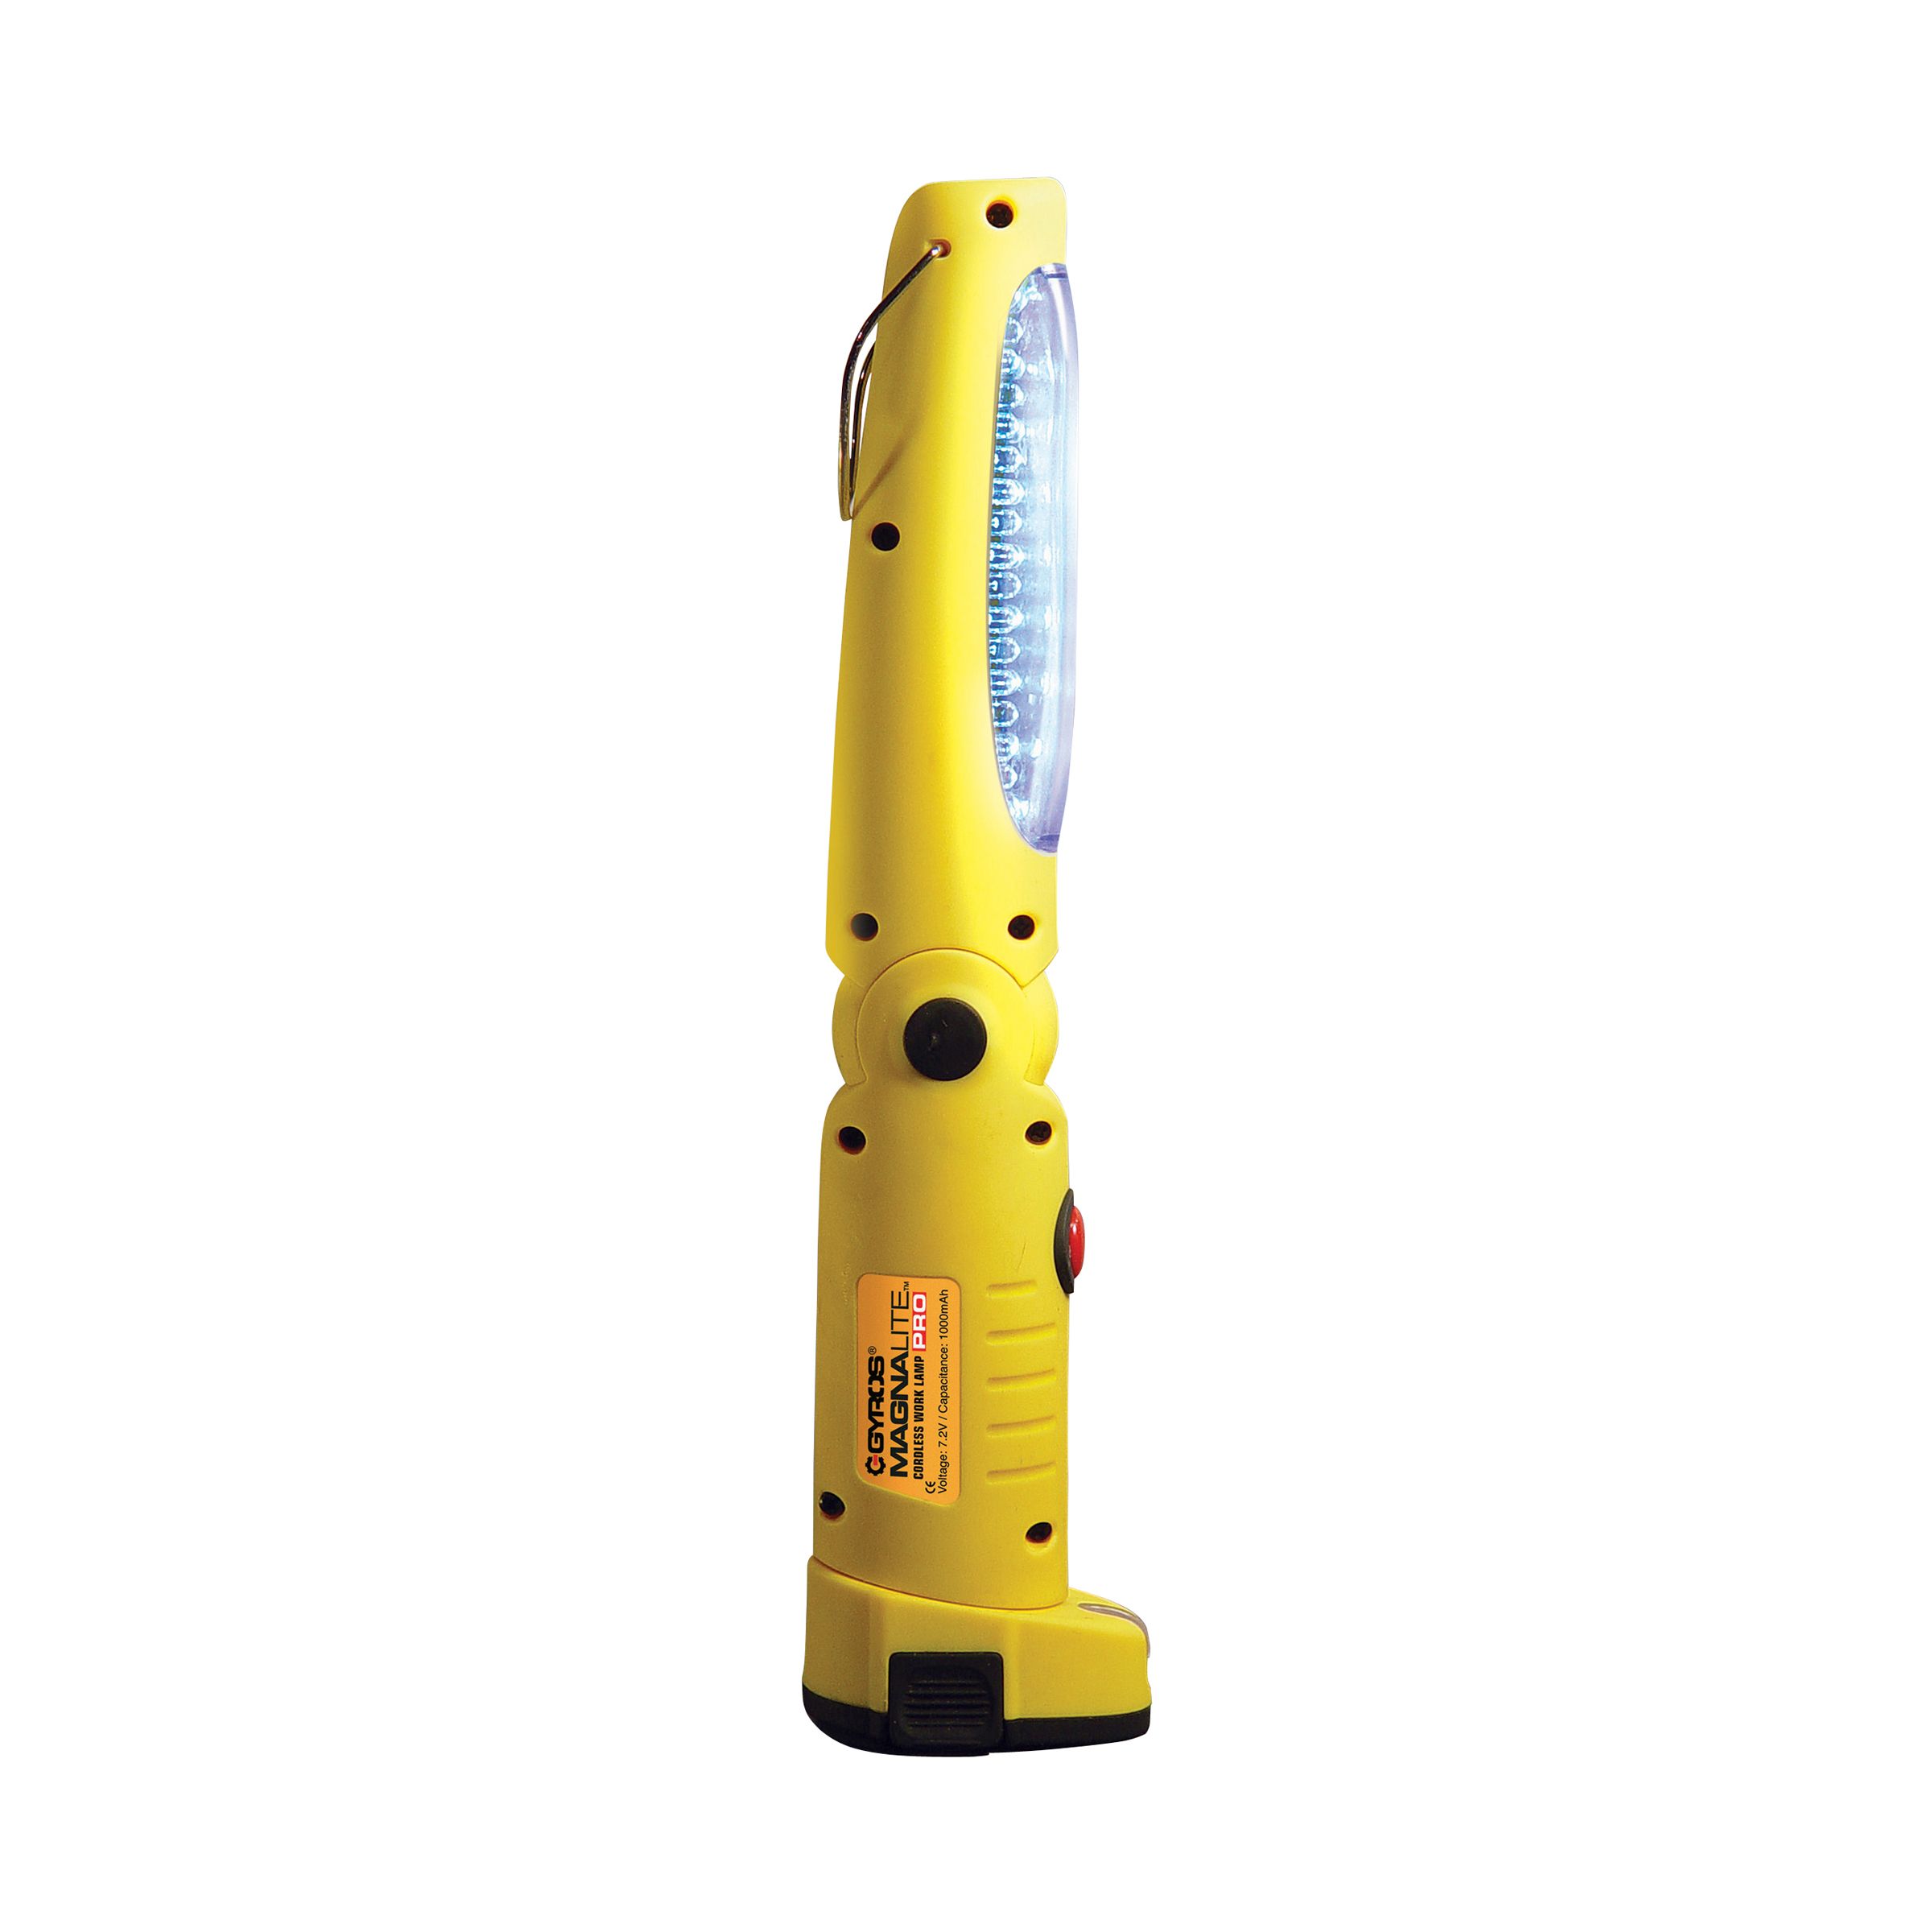 Gyros MAGNALite PRO Cordless Rechargeable LED Work Light